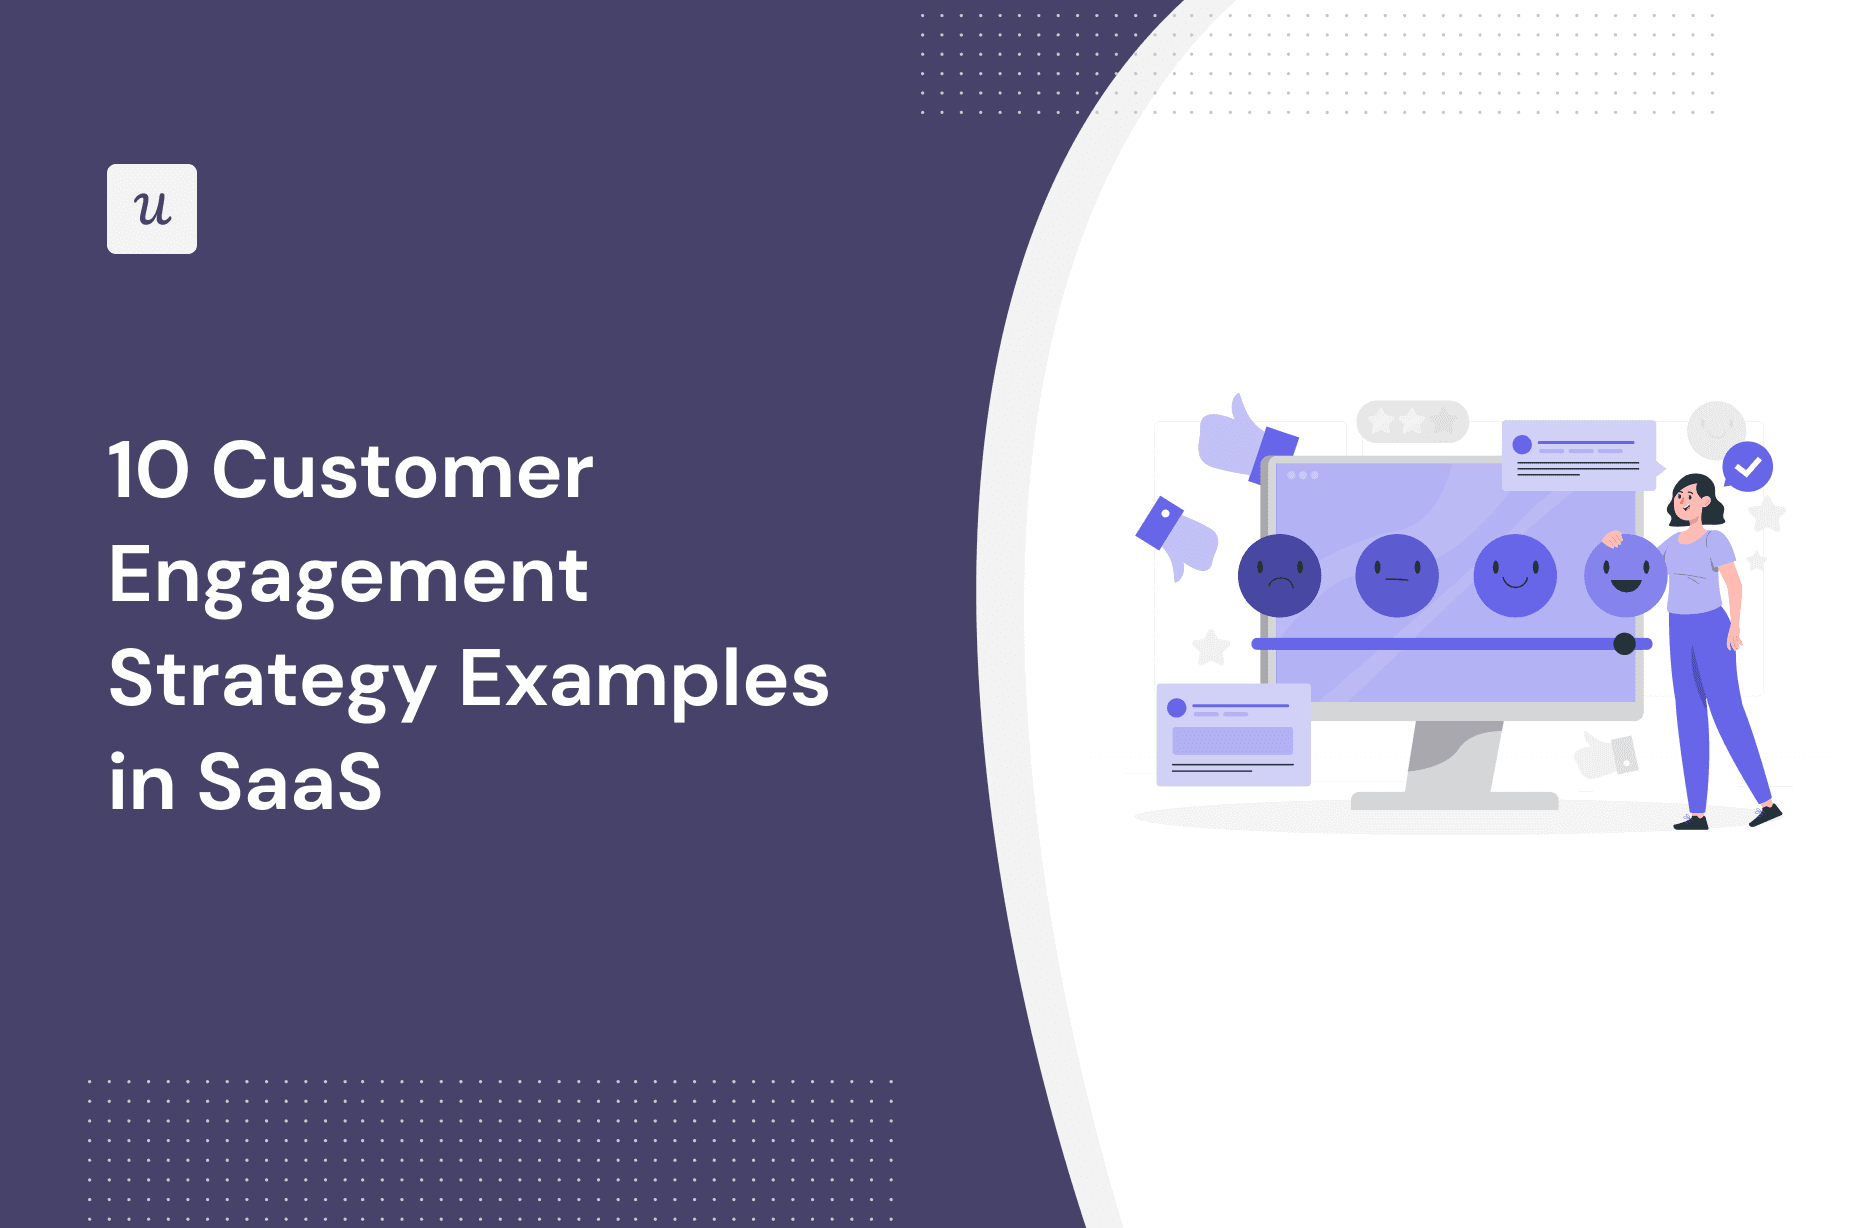 10 Customer Engagement Strategy Examples in SaaS cover